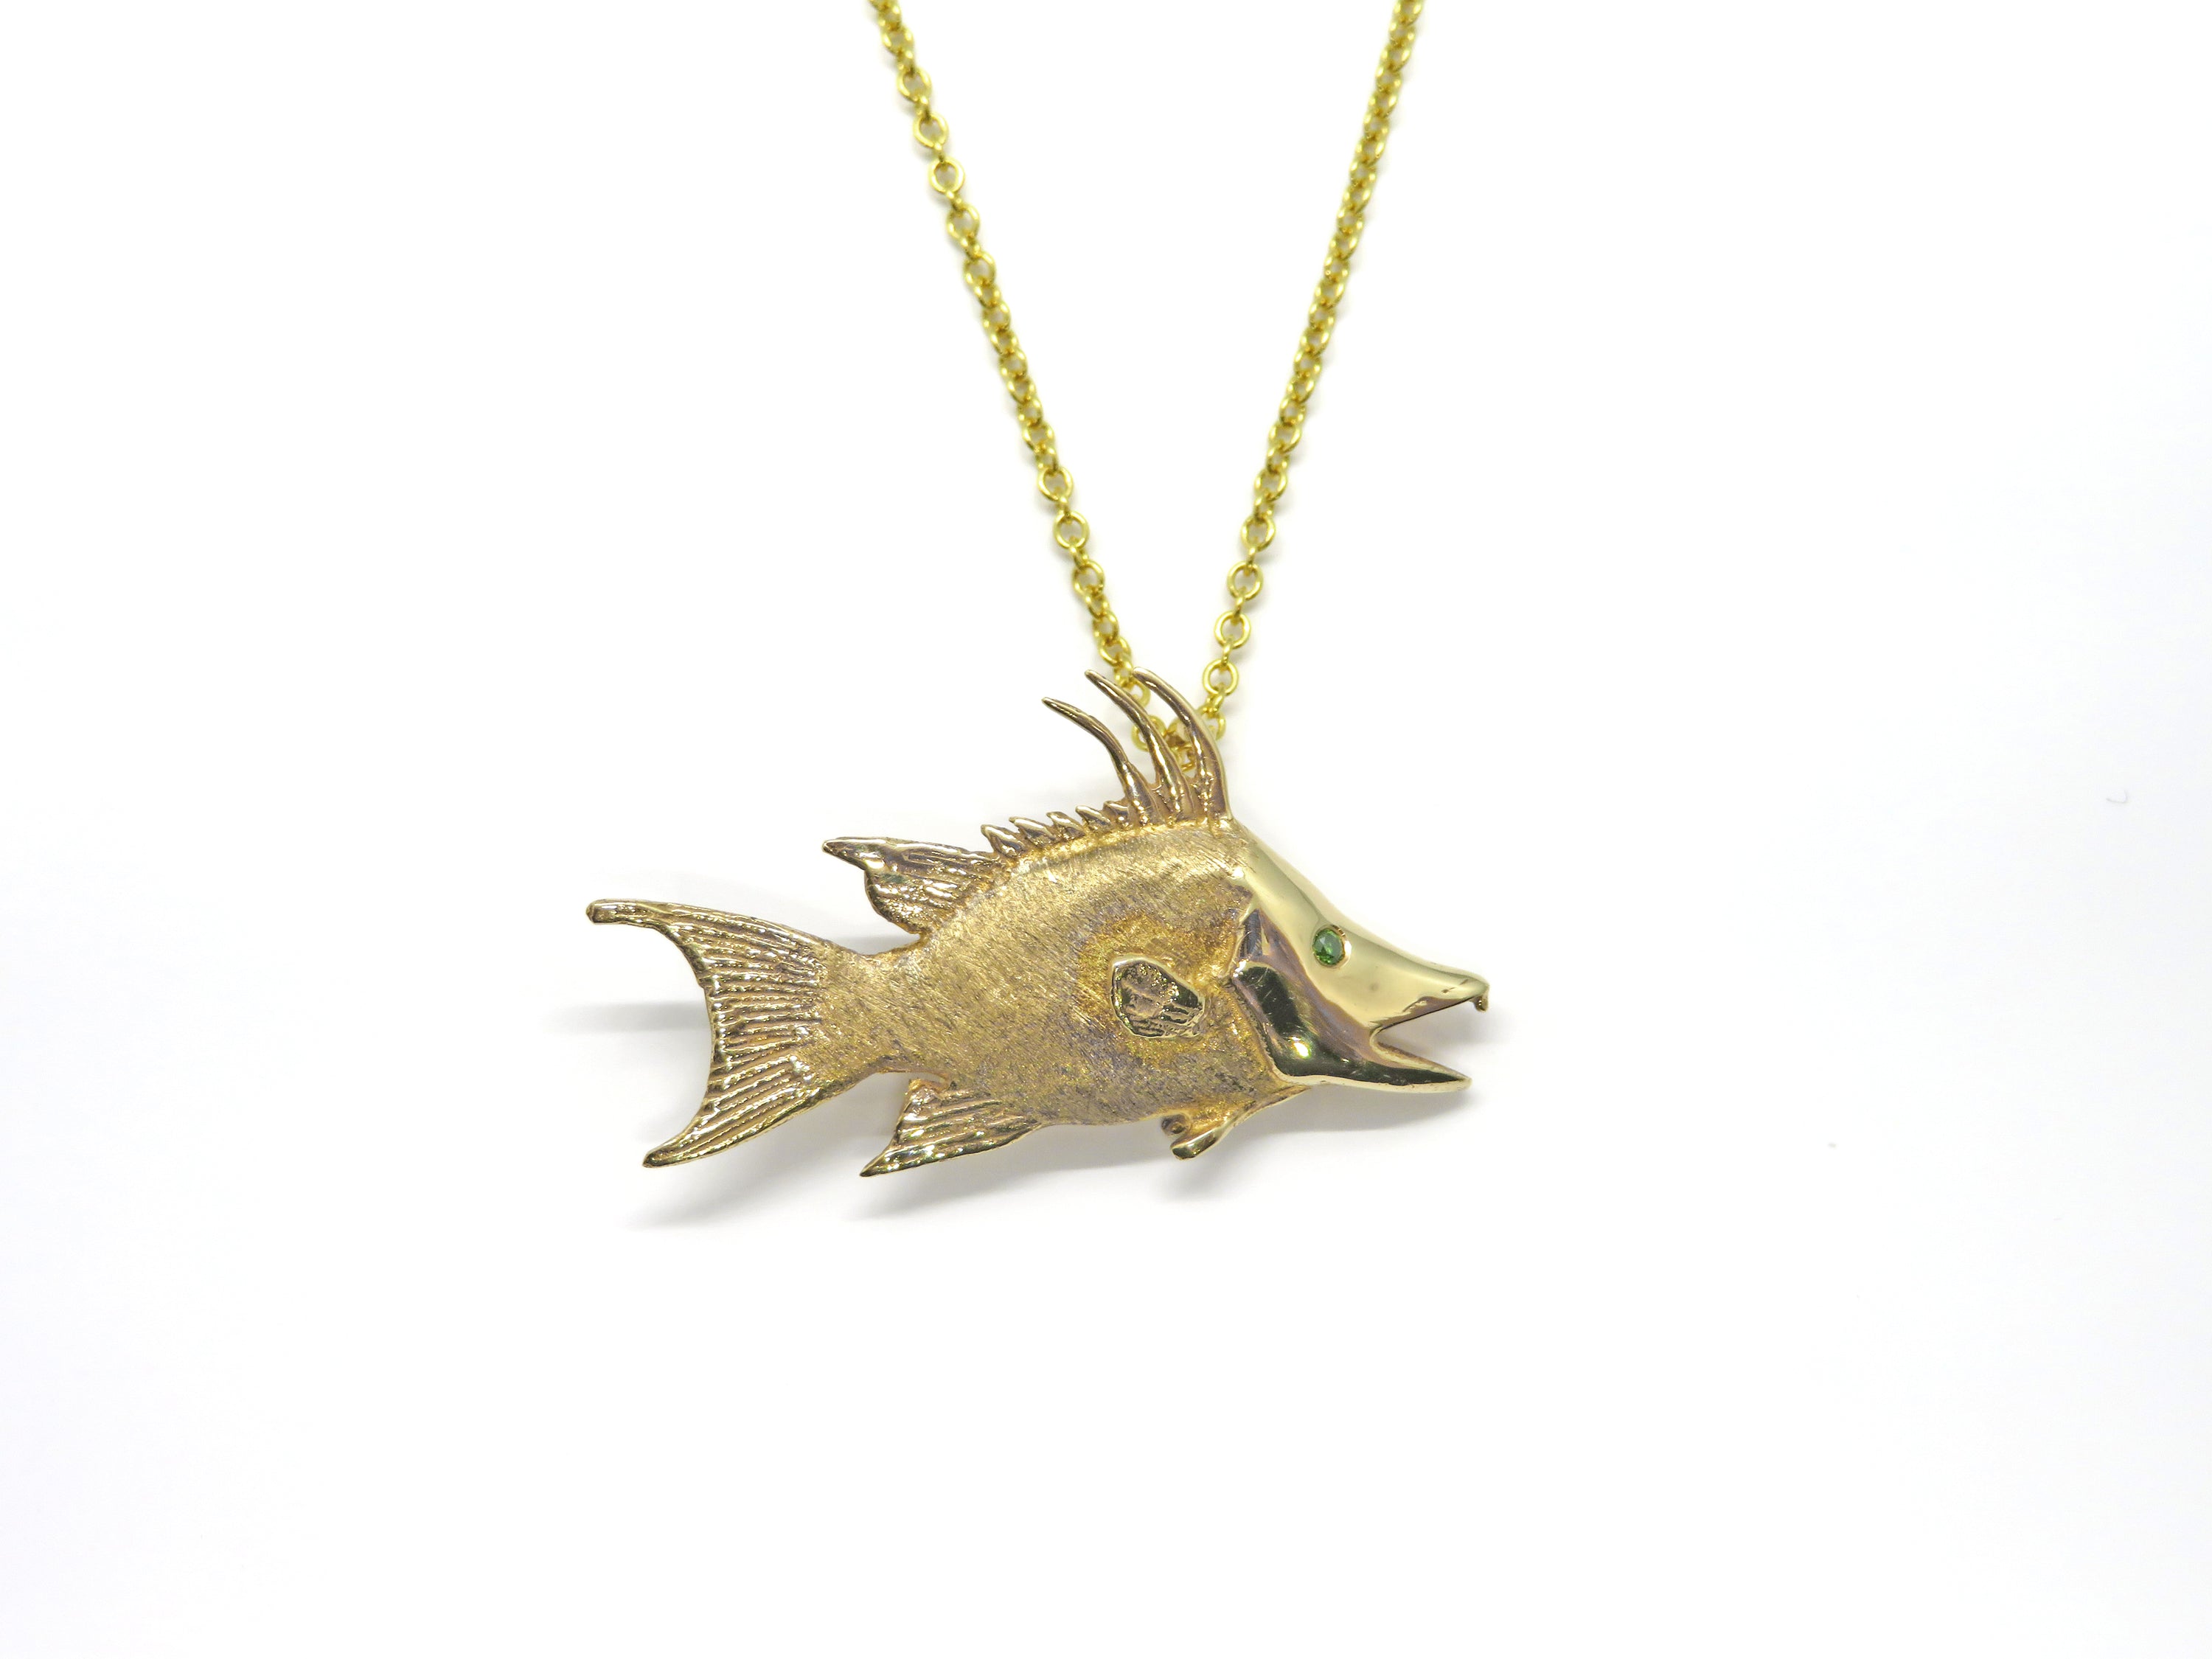 18kt Yellow Gold Hog Snapper Fish Pendant Necklace